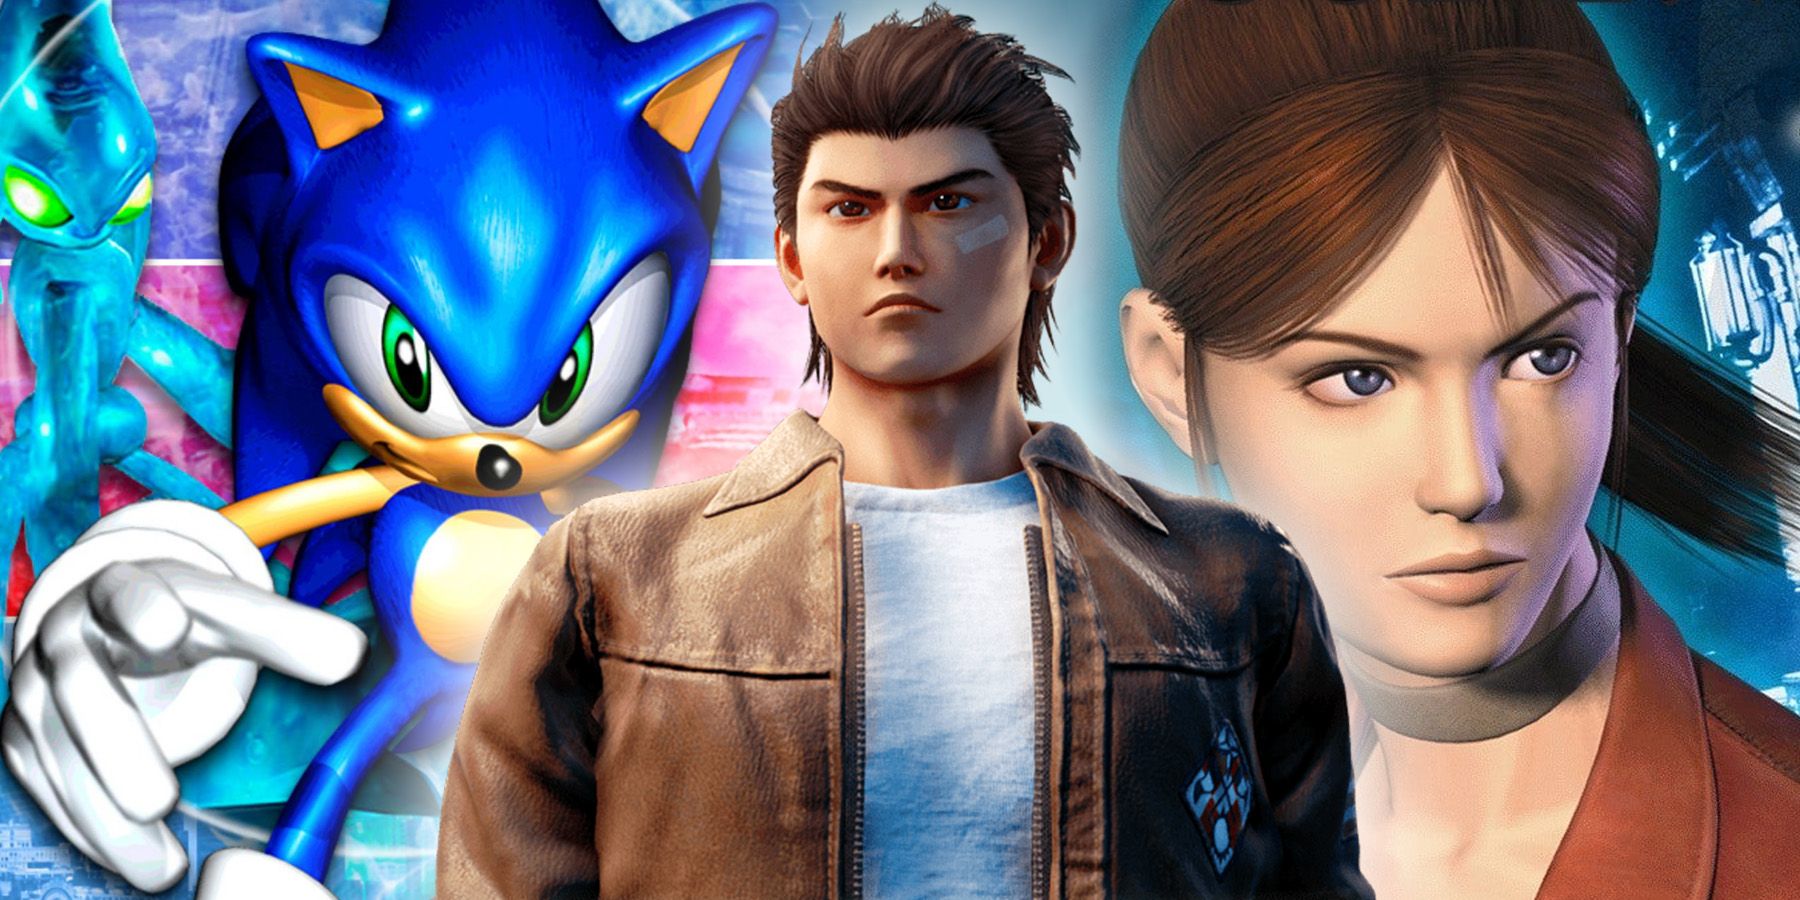 Sonic the Hedgehog, Ryo Hazuki, and Claire Redfield, all from Dreamcast games.